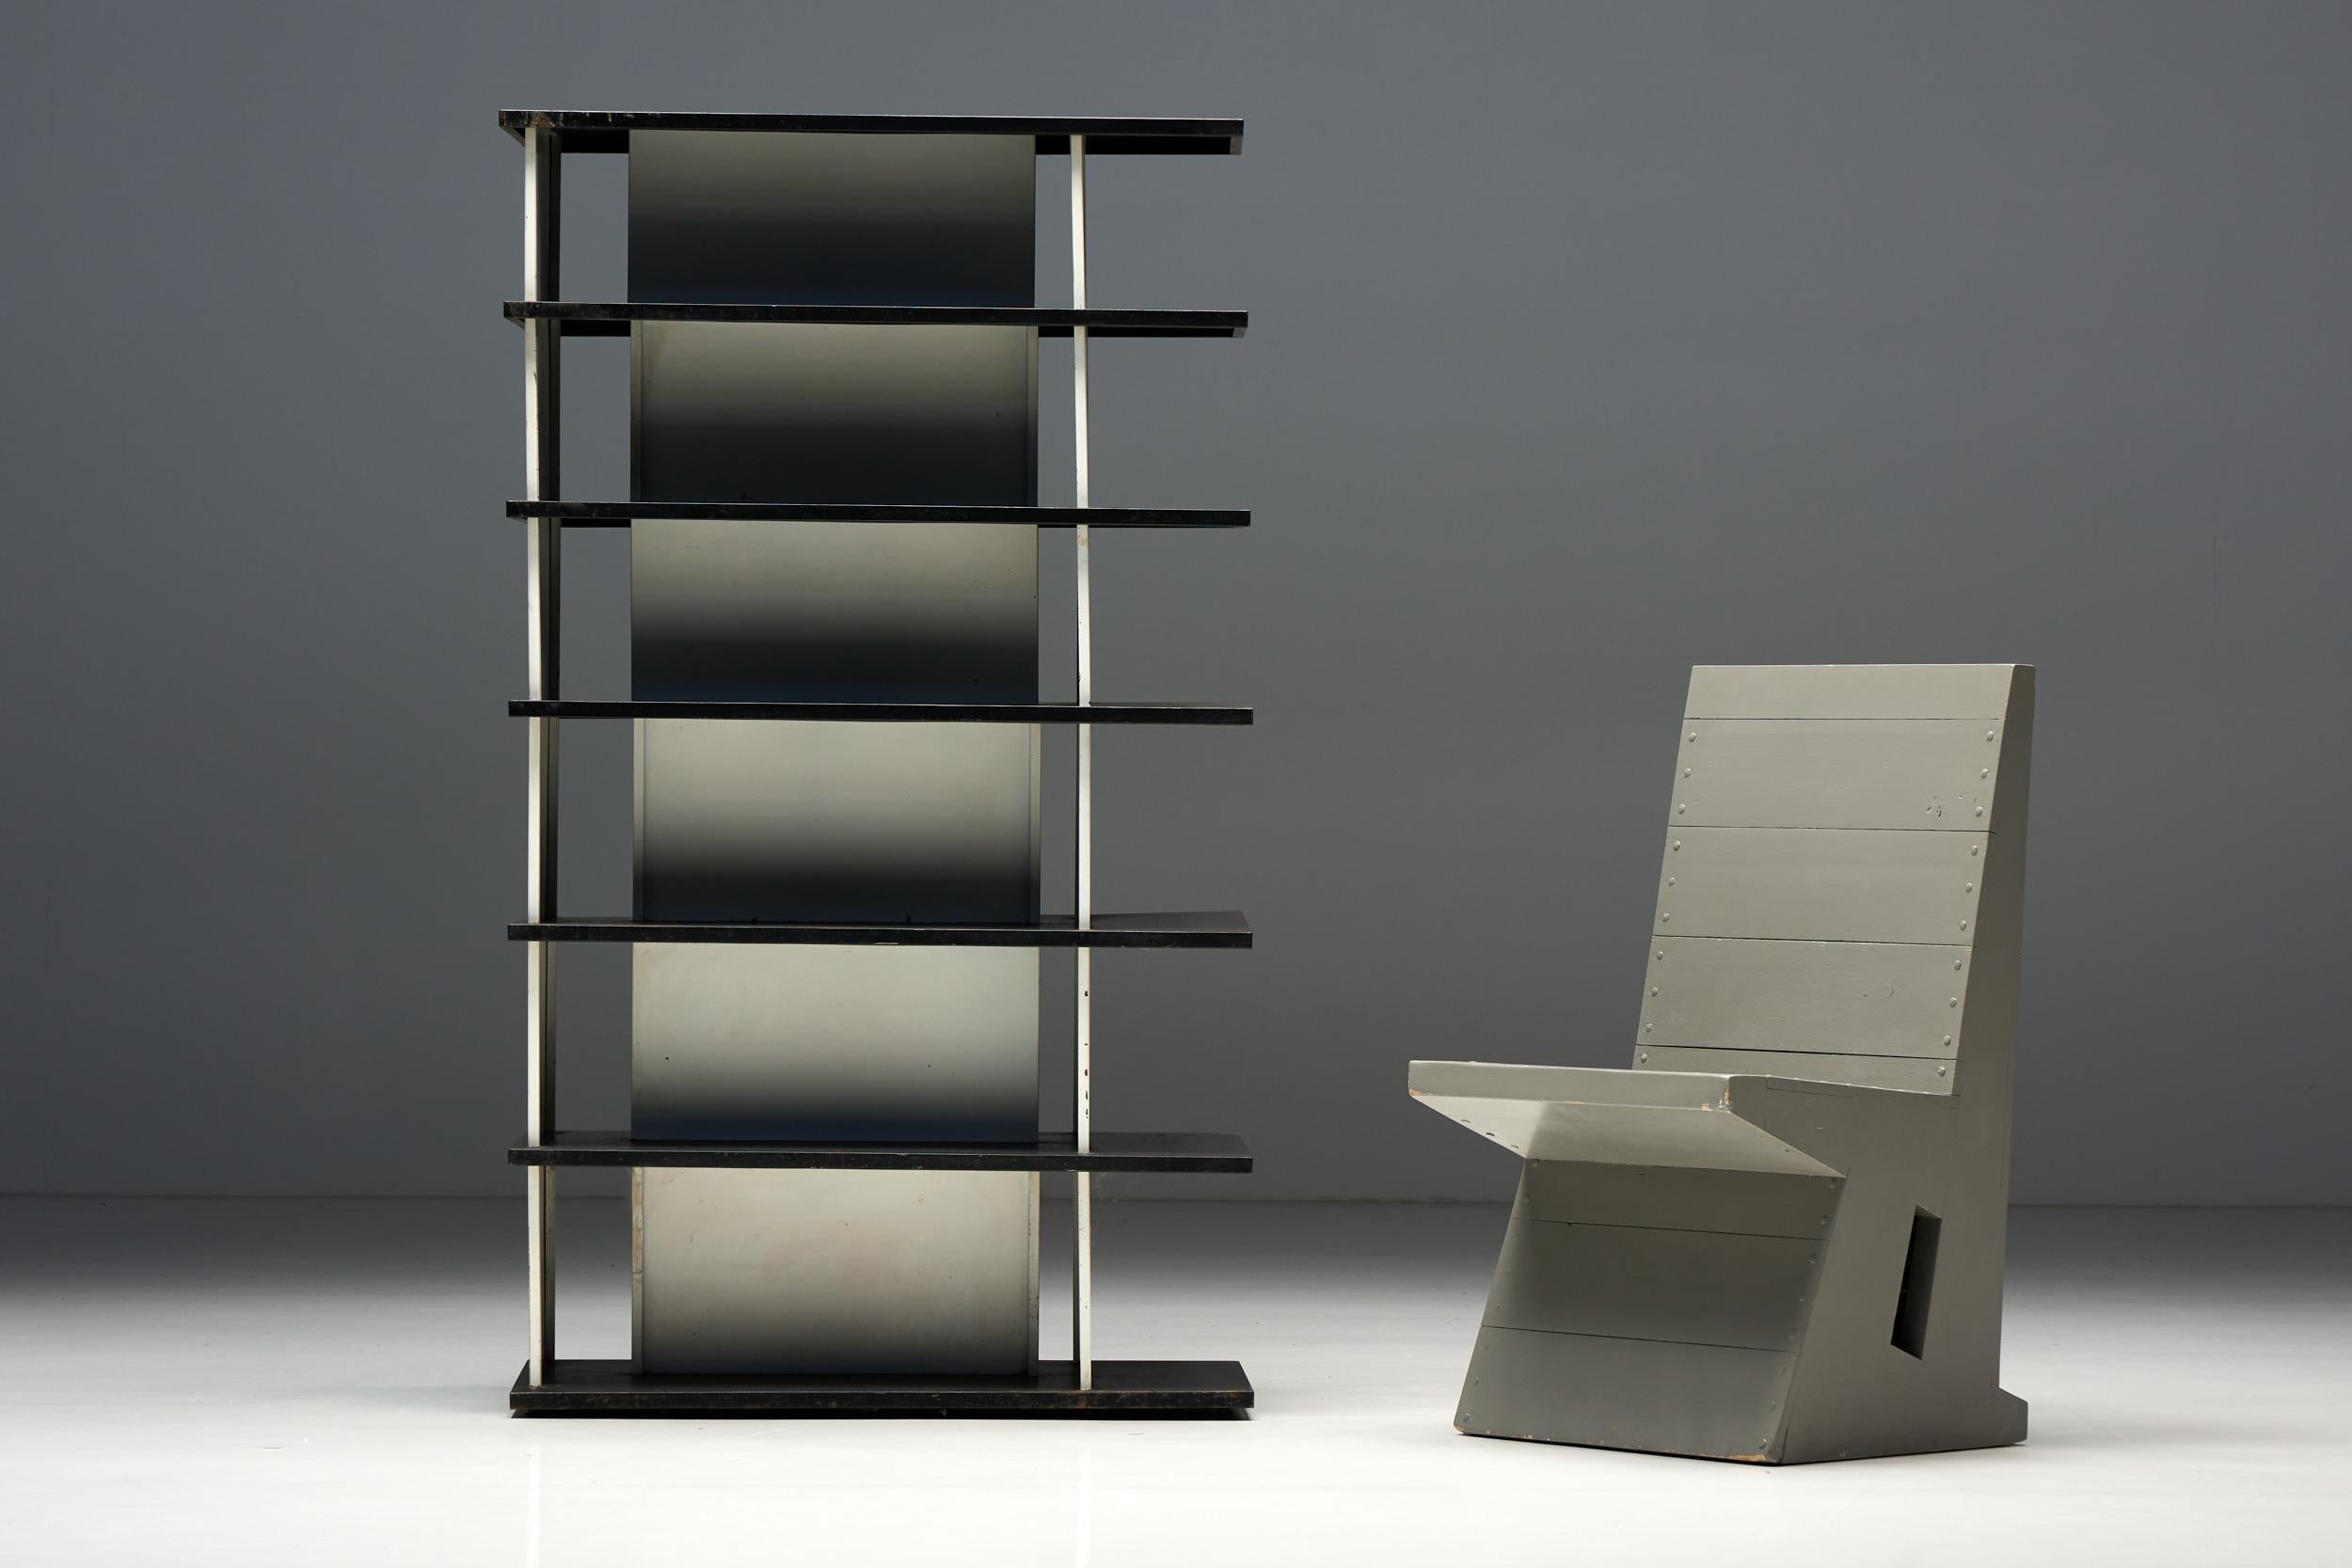 Wim Rietveld; Gerrit Rietveld; room divider; bookcase; industrial; shelving unit; industrial design; minimalist; functionality; simplicity; 1960s.

Wim Rietveld industrial room divider. A stunning piece of furniture that not only adds a touch of